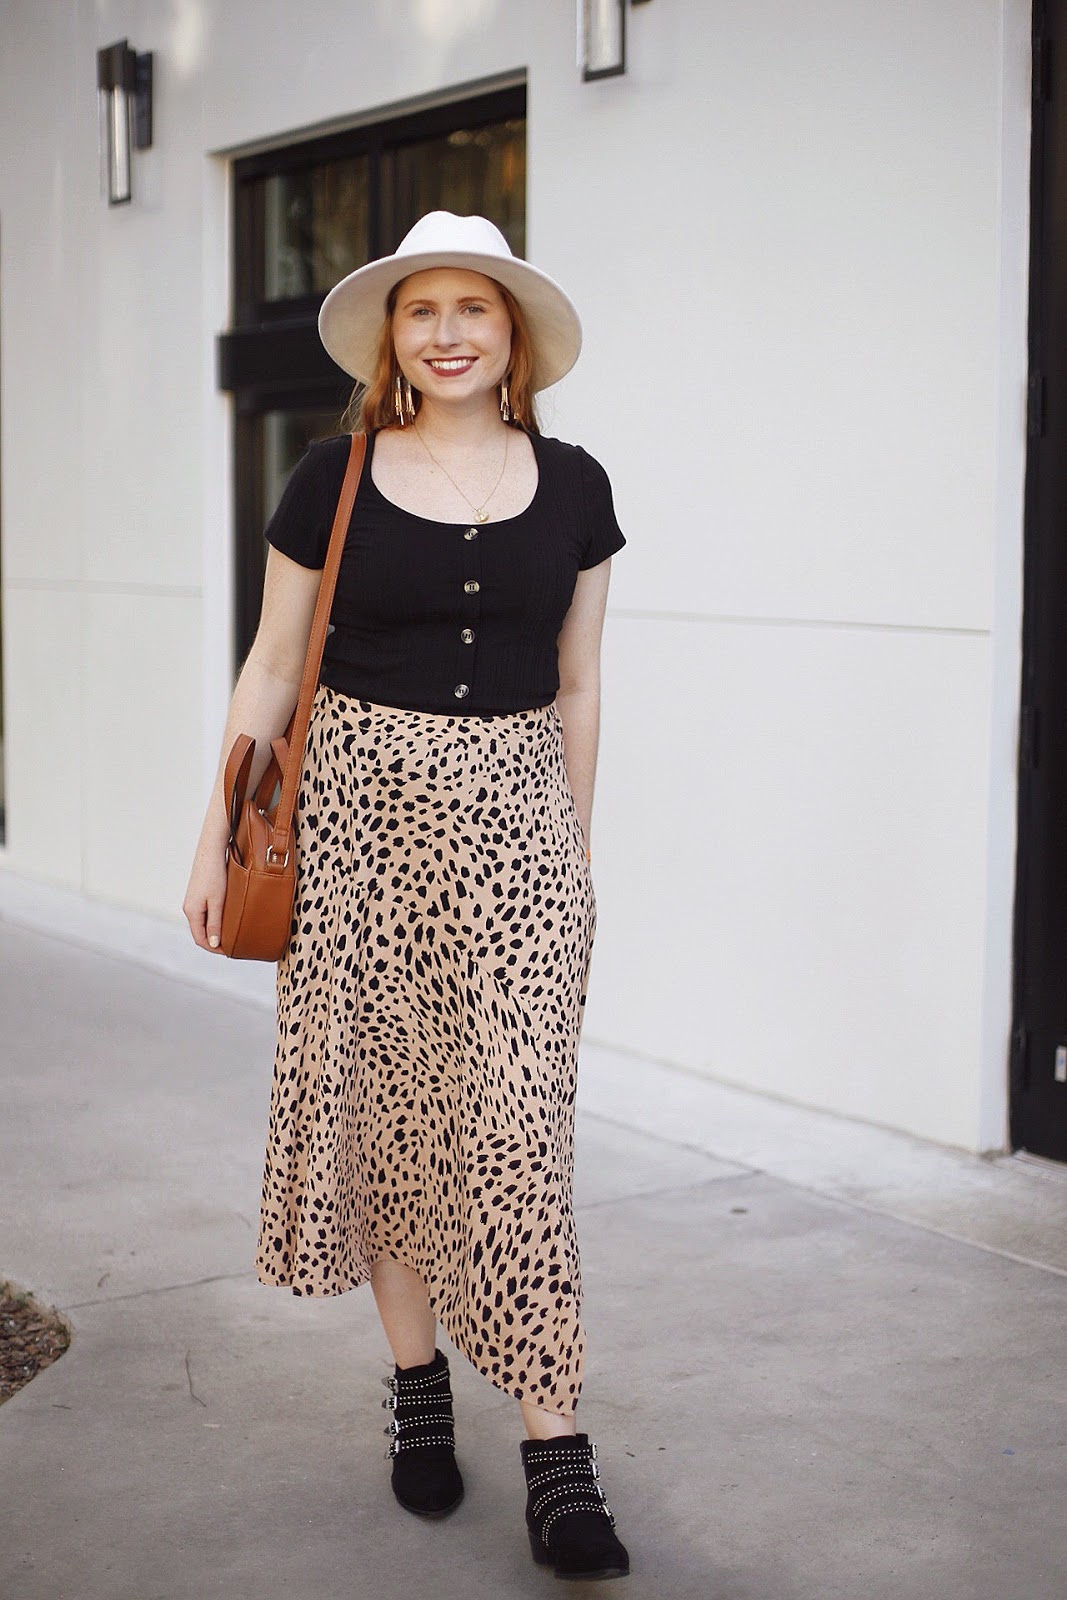 The Leopard Midi Skirt I Can't Stop Wearing for Fall